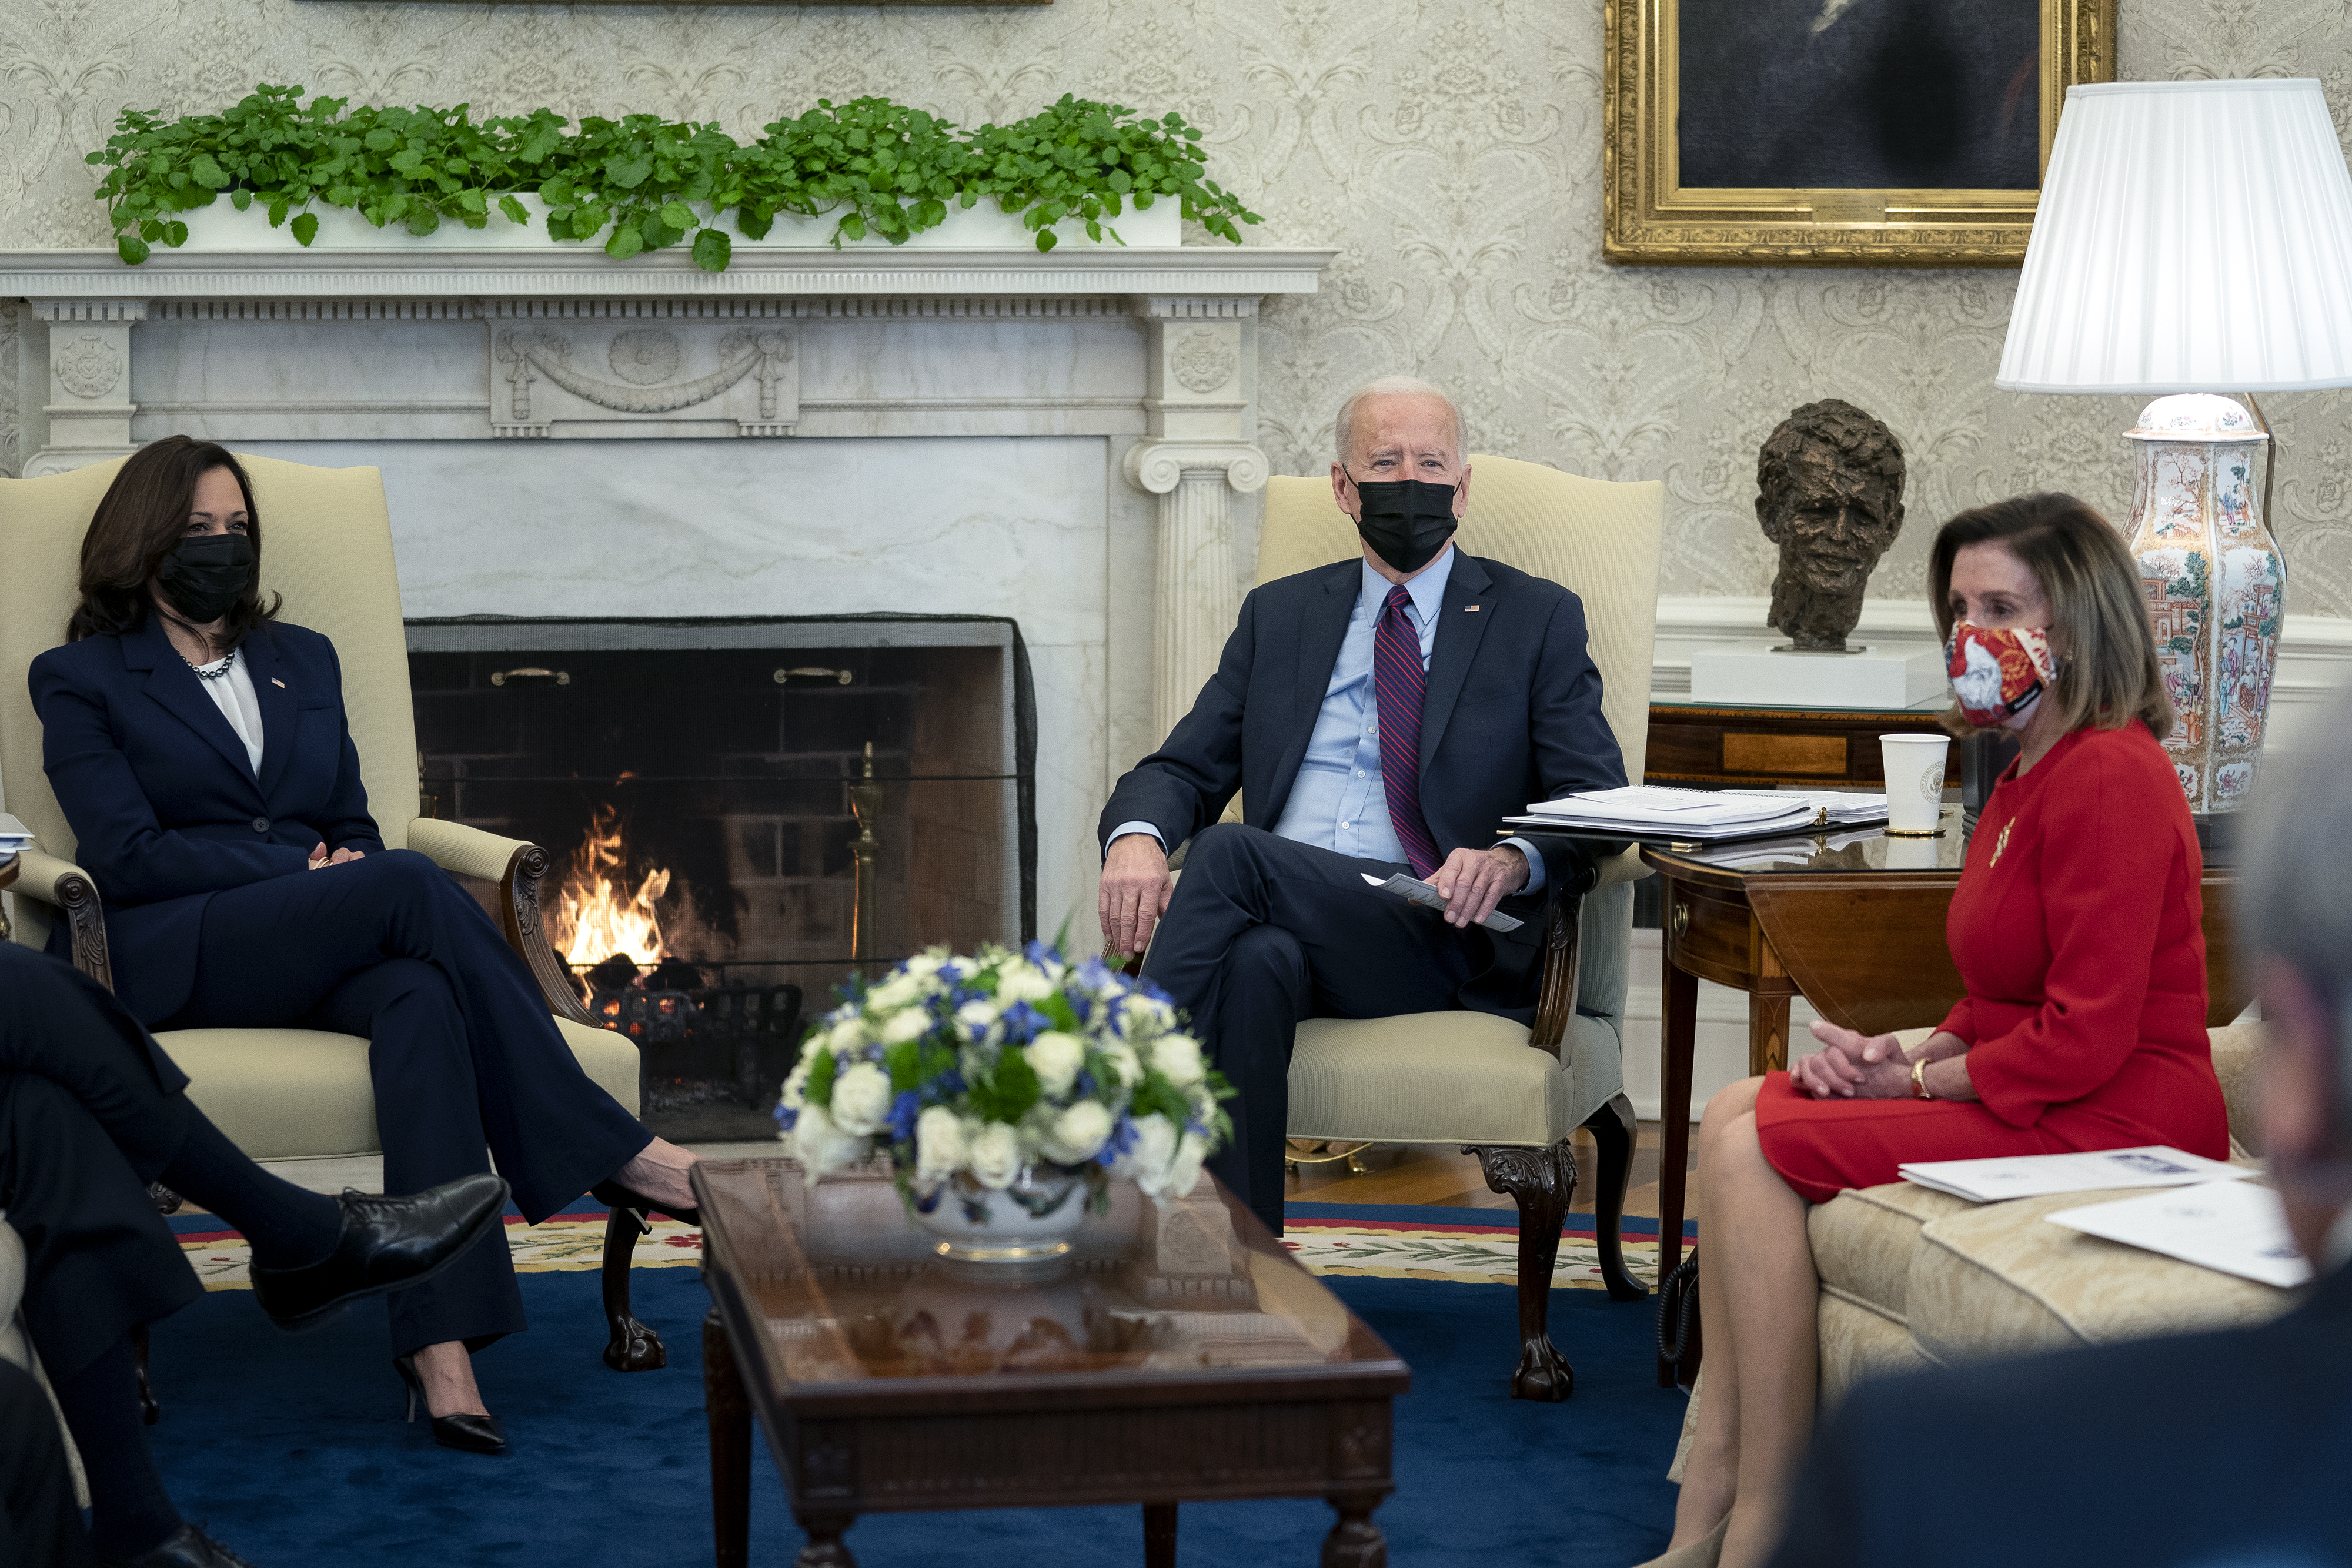 President Joe Biden, center, U.S. Vice President Kamala Harris, left, and U.S. House Speaker Nancy Pelosi, a Democrat from California, wear protective masks during a meeting in the Oval Office of the White House in Washington, D.C., U.S., on Friday, Feb. 5, 2021. The Senate voted 51-50 to adopt a budget blueprint for Biden's $1.9 trillion virus relief package following nearly 15 hours of wading through amendments from both parties. (Stefani Reynolds—The New York Times/Bloomberg/Getty Images)